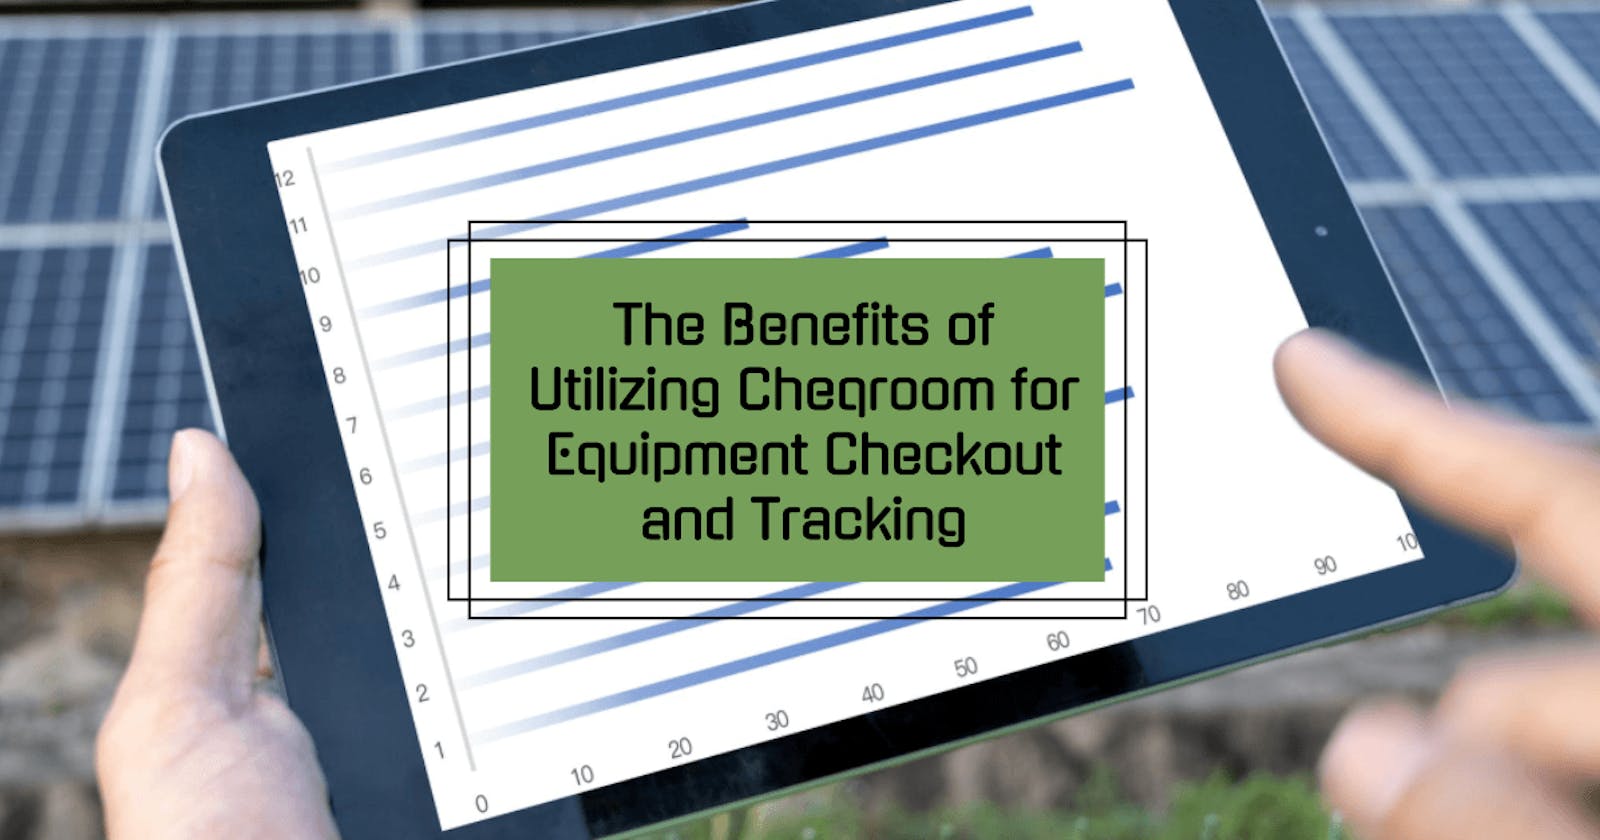 The Benefits of Utilizing Cheqroom for Equipment Checkout and Tracking